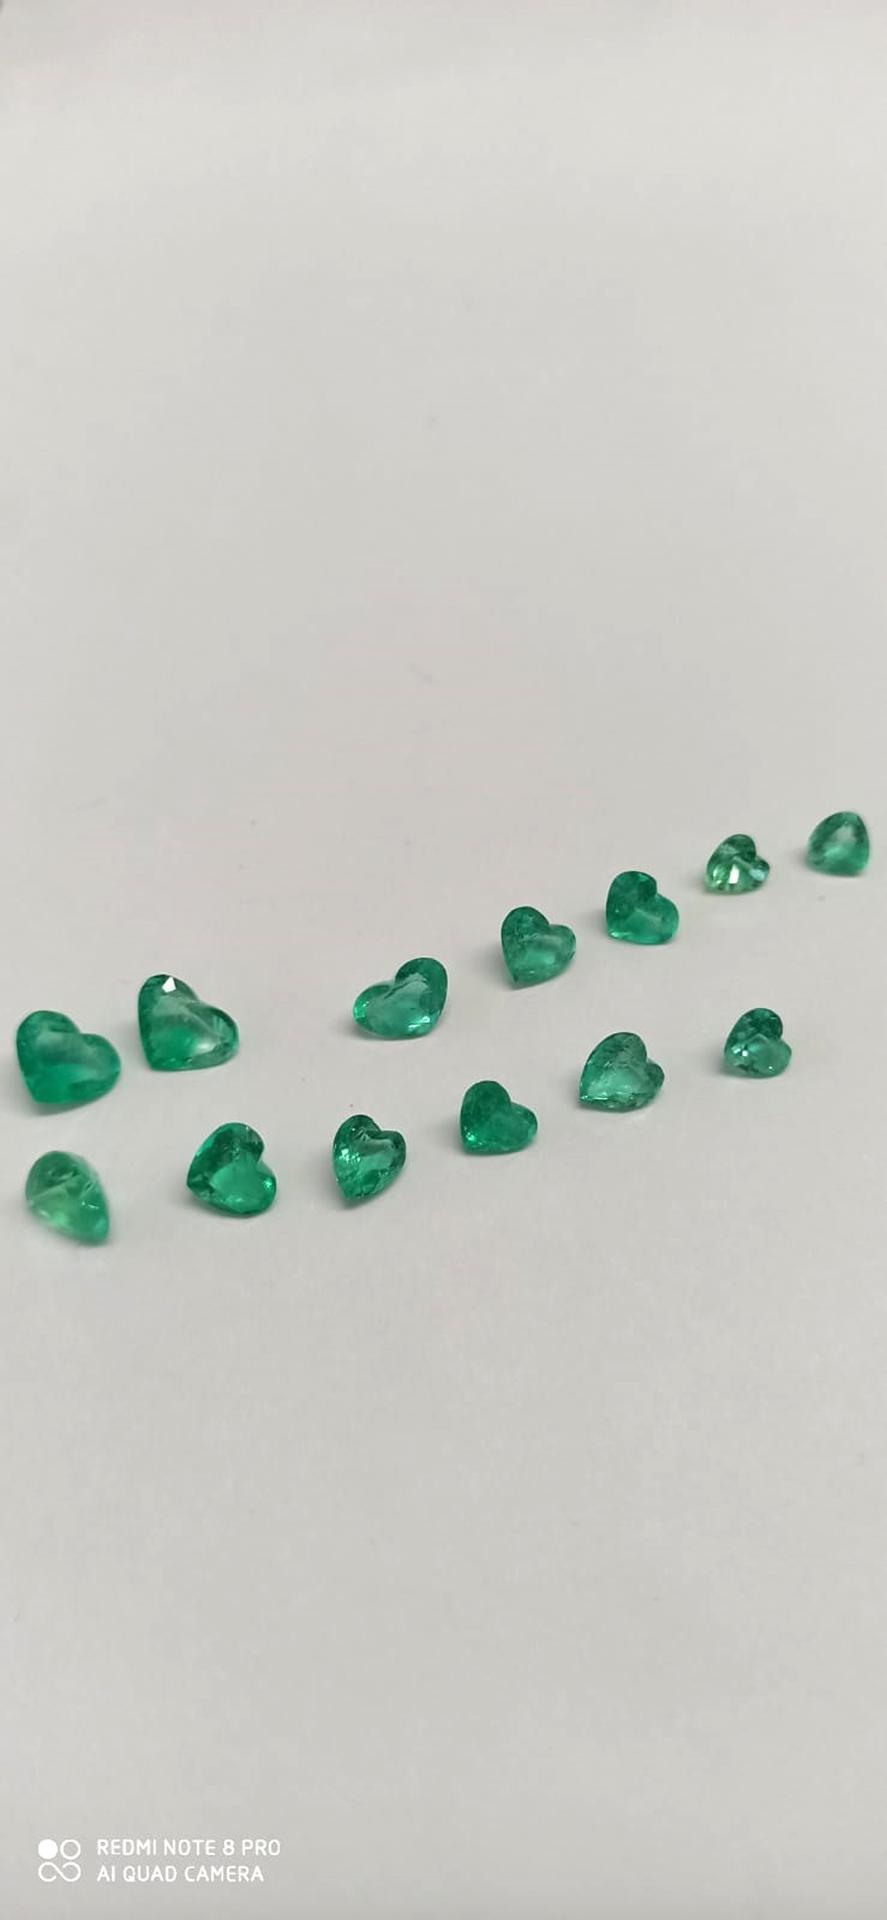 15.0  Ct. Colombian Emerald Hearts Lot 